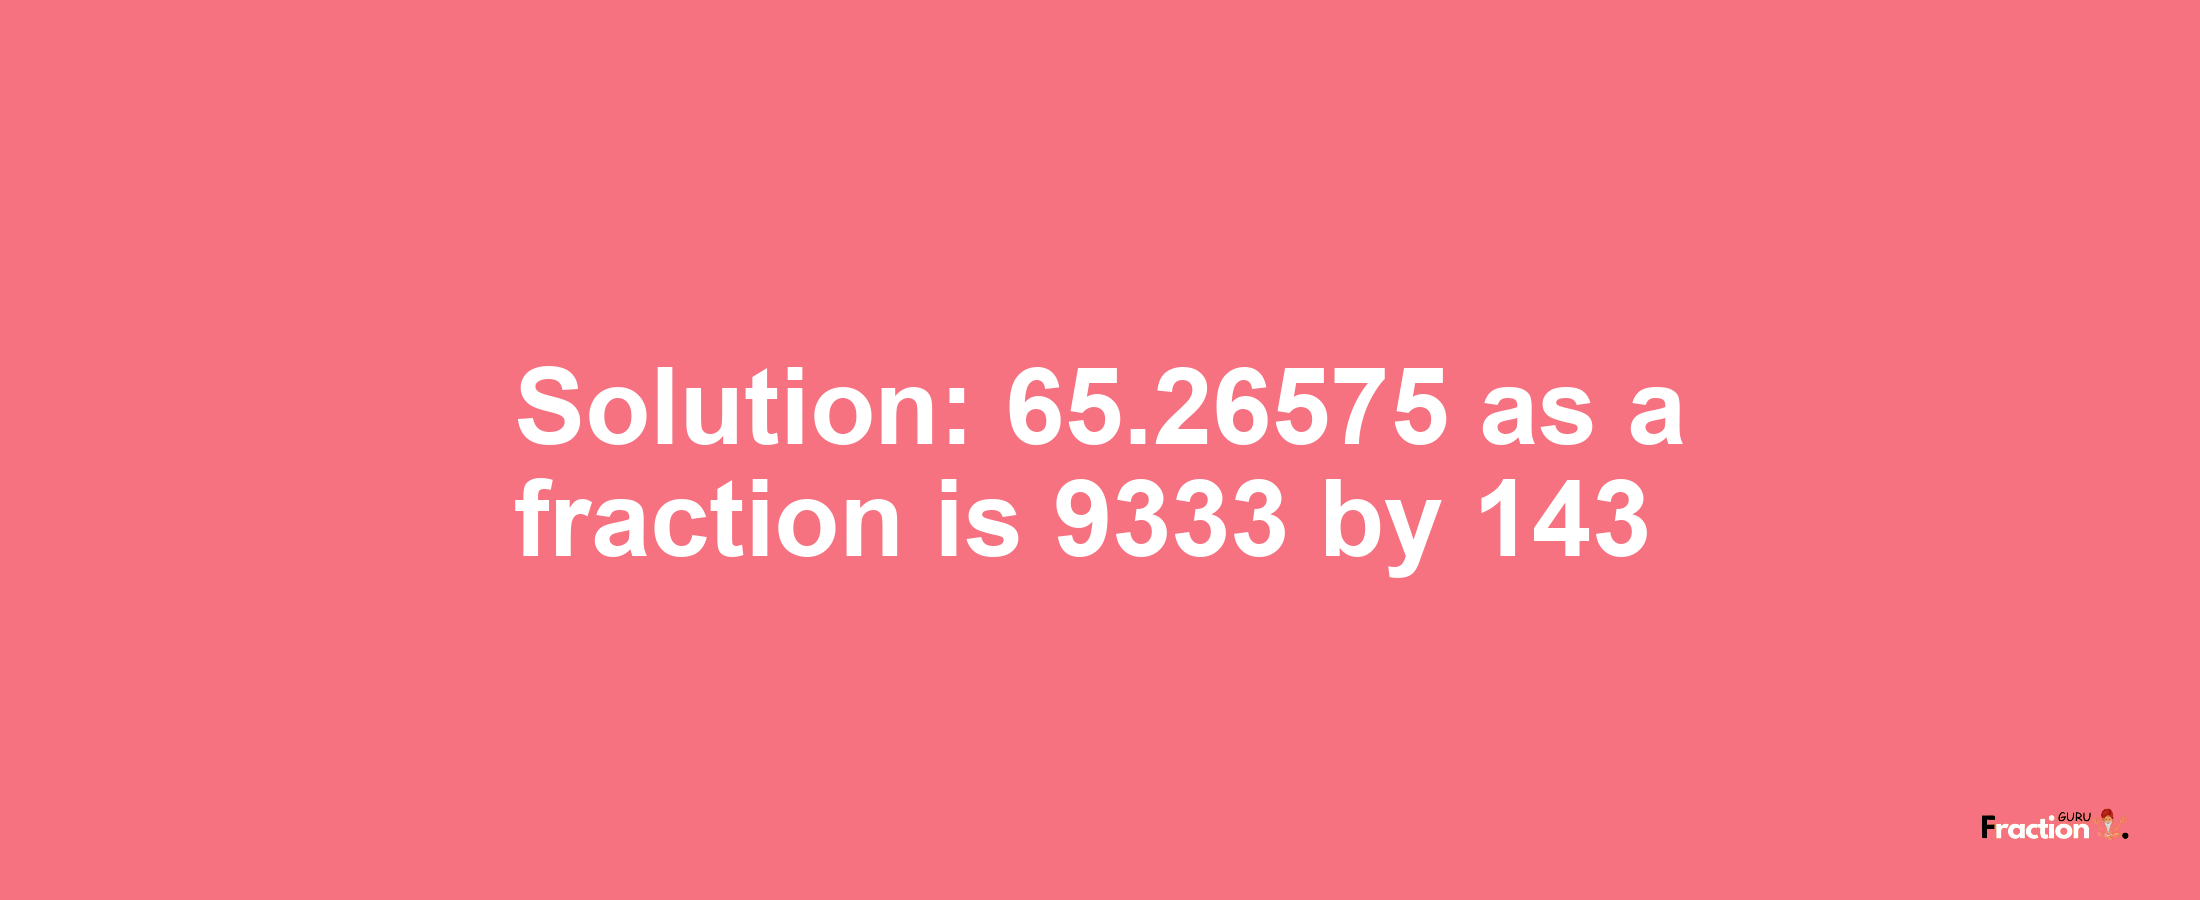 Solution:65.26575 as a fraction is 9333/143